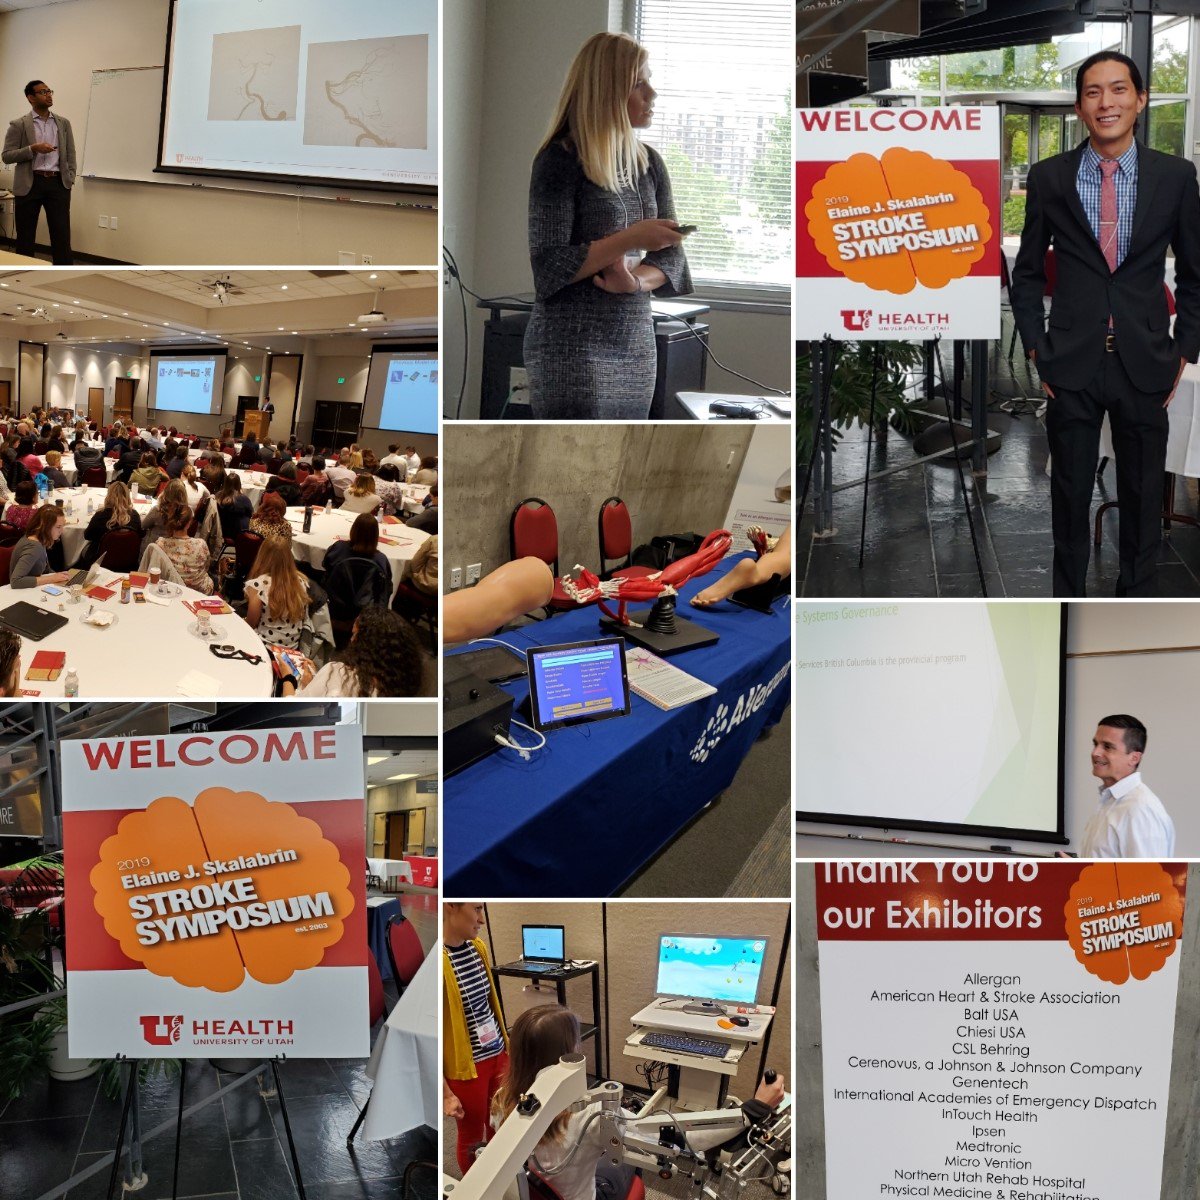 Last Friday, @UofUCNC was pleased to host the Annual Elaine J. Skalabrin #Stroke Symposium in Salt Lake City. This year brought a record number of attendees as well as presenters from all over the world. Looking forward to next year! @UofUHealth #StrokeAwarenessMonth #neurology